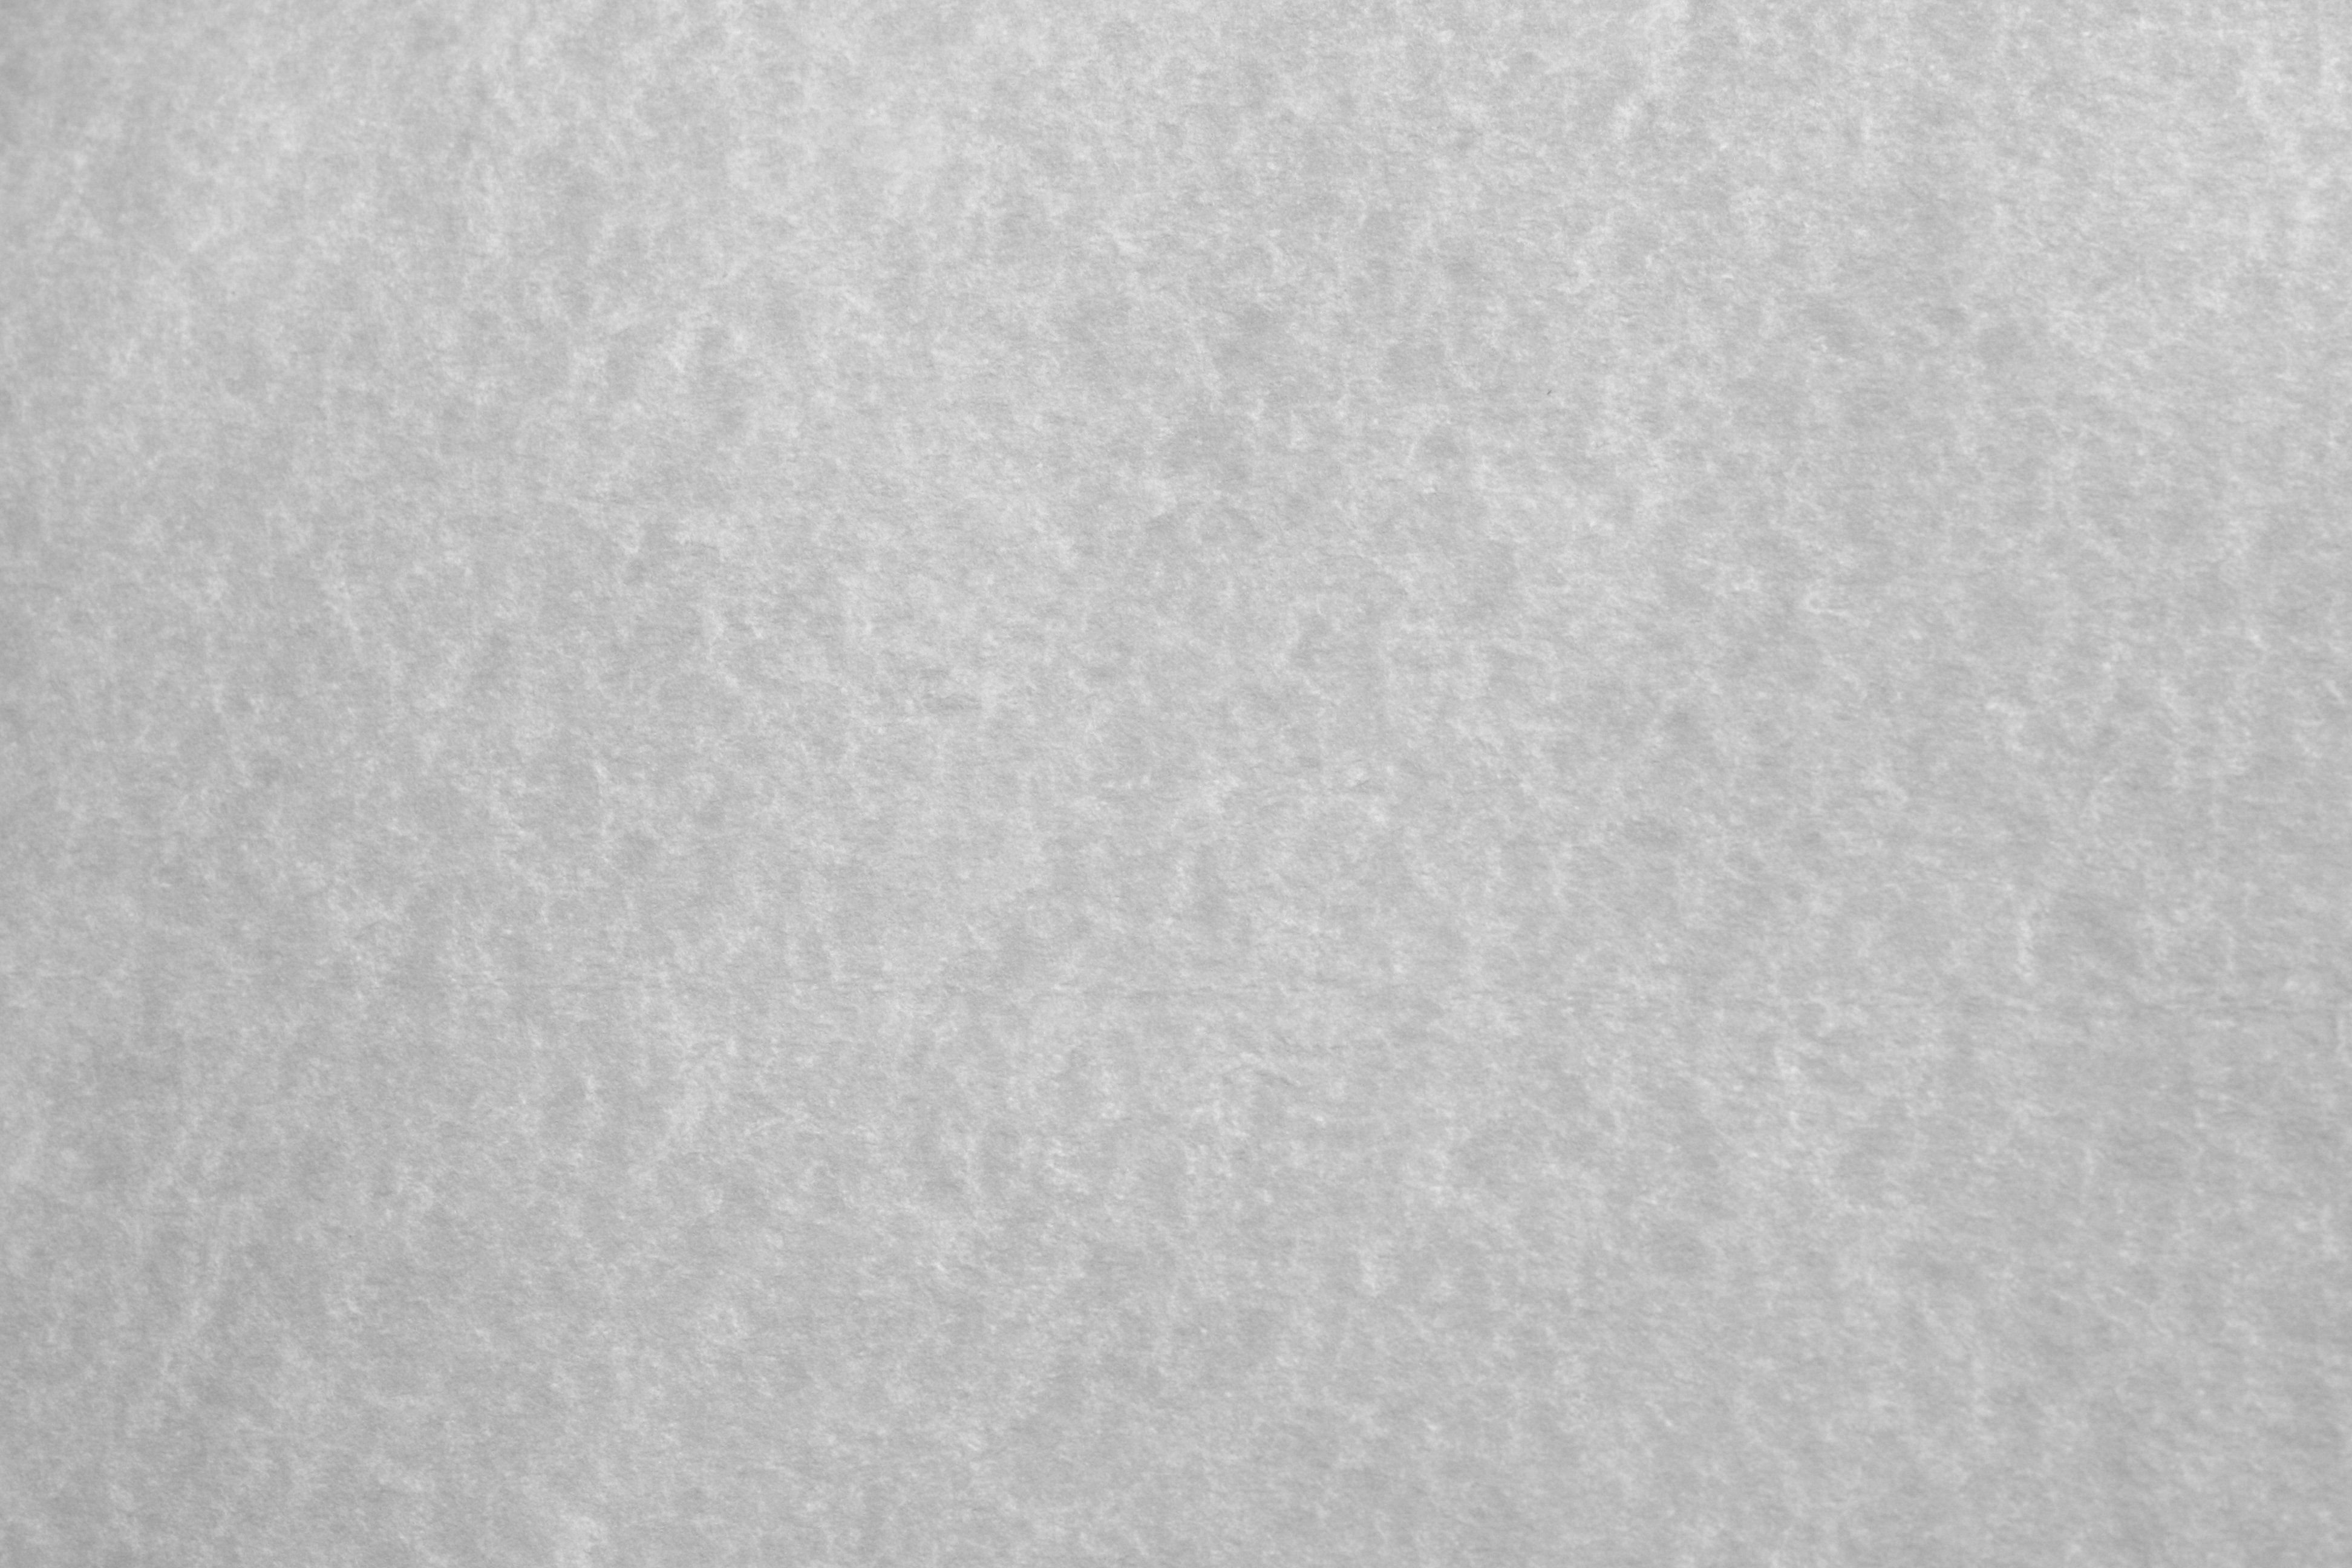 Gray Parchment Paper Texture Picture. Free Photograph. Grey wallpaper background, Grey textured wallpaper, Paper texture